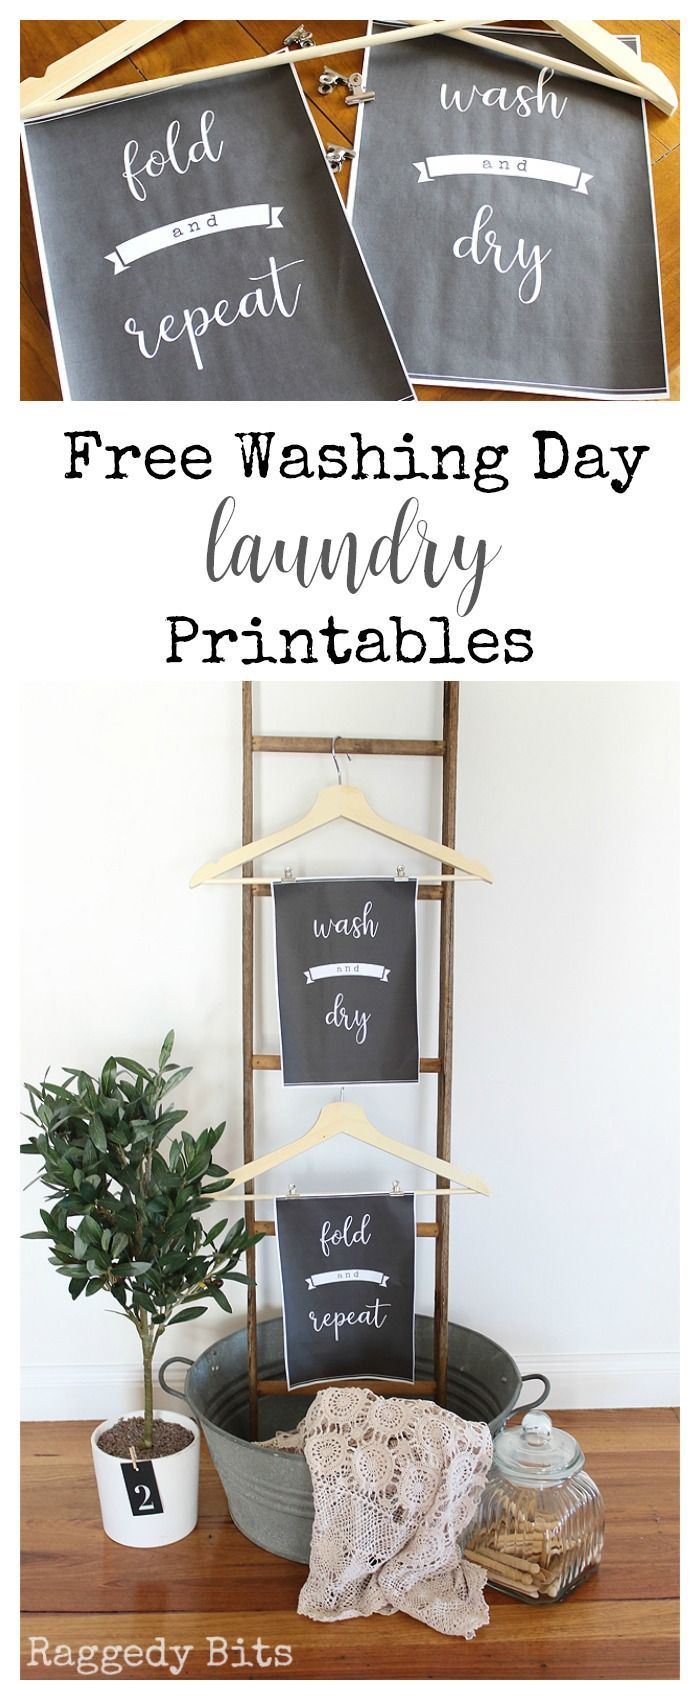 FREE Washing Day Laundry Printables -   24 crafts room printables
 ideas